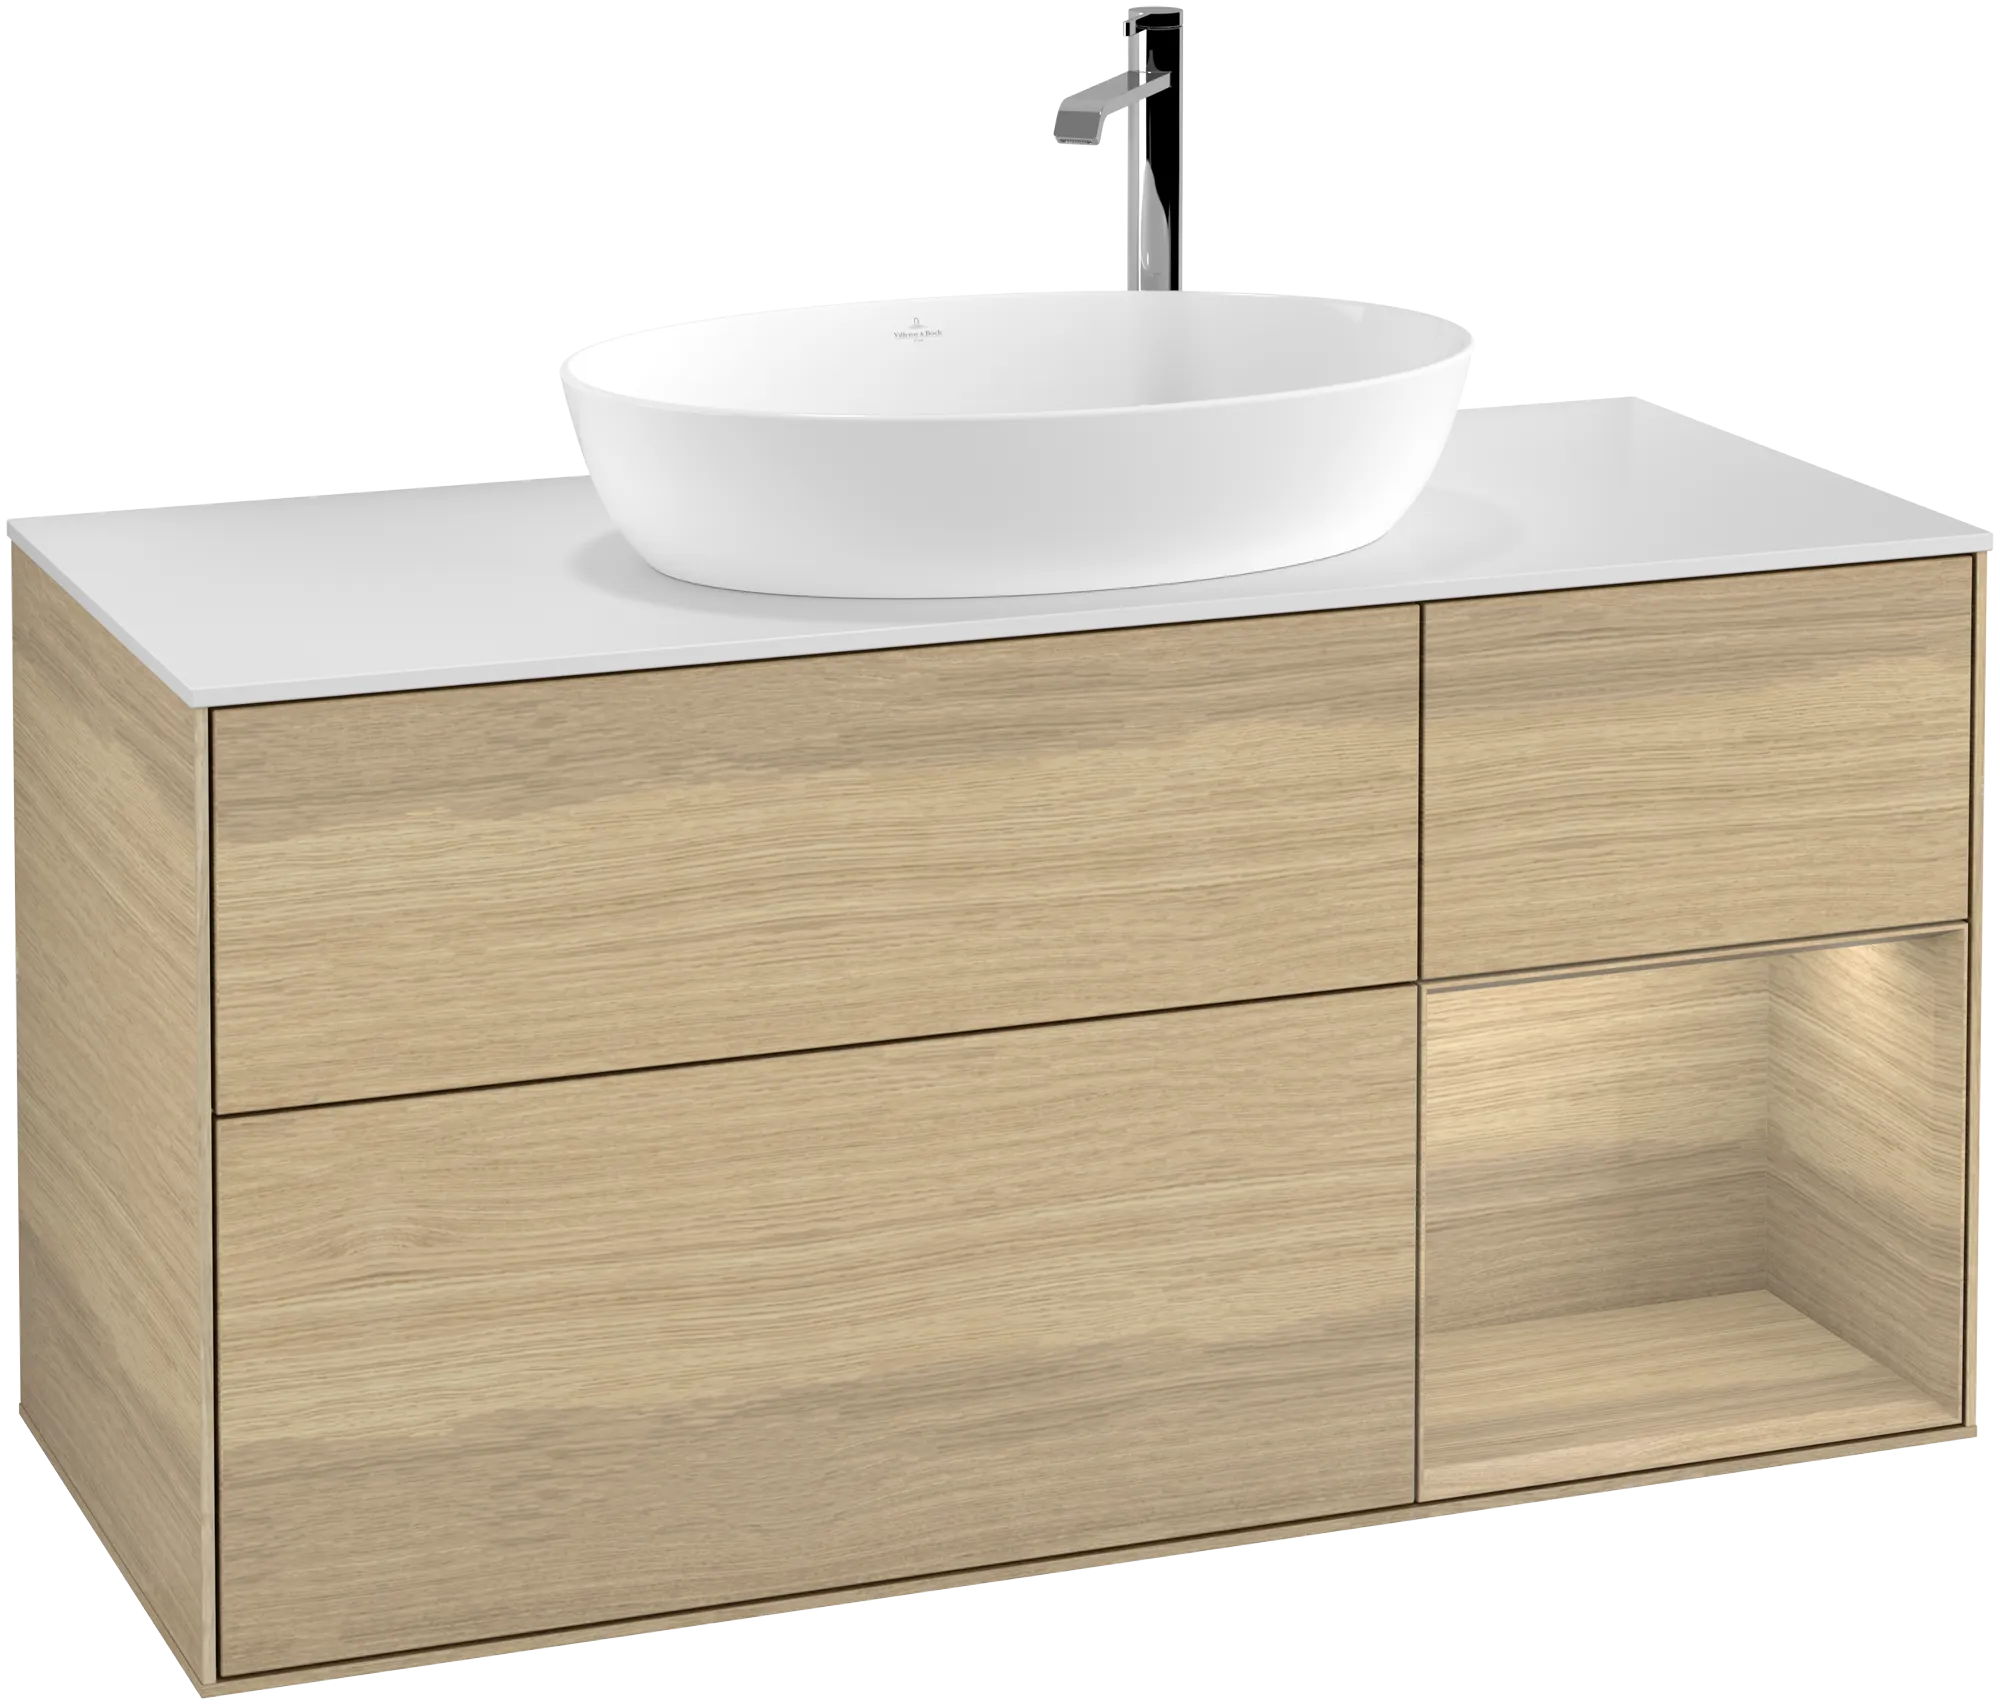 Picture of VILLEROY BOCH Finion Vanity unit, with lighting, 3 pull-out compartments, 1200 x 603 x 501 mm, Oak Veneer / Oak Veneer / Glass White Matt #G951PCPC